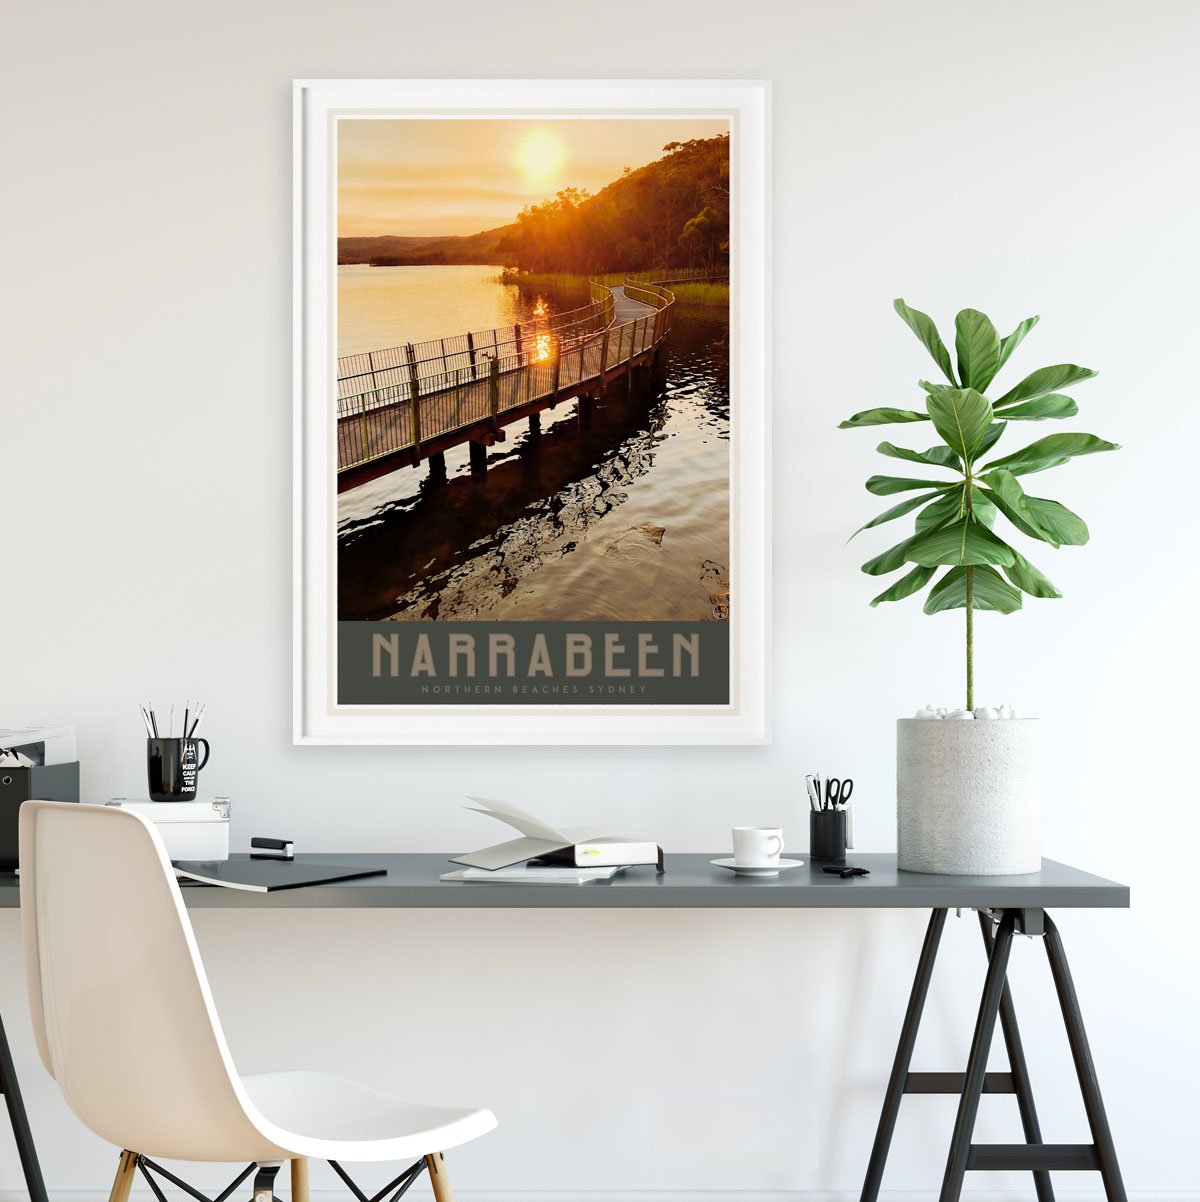 Narrabeen Lake poster vintage travel style by placesweluv